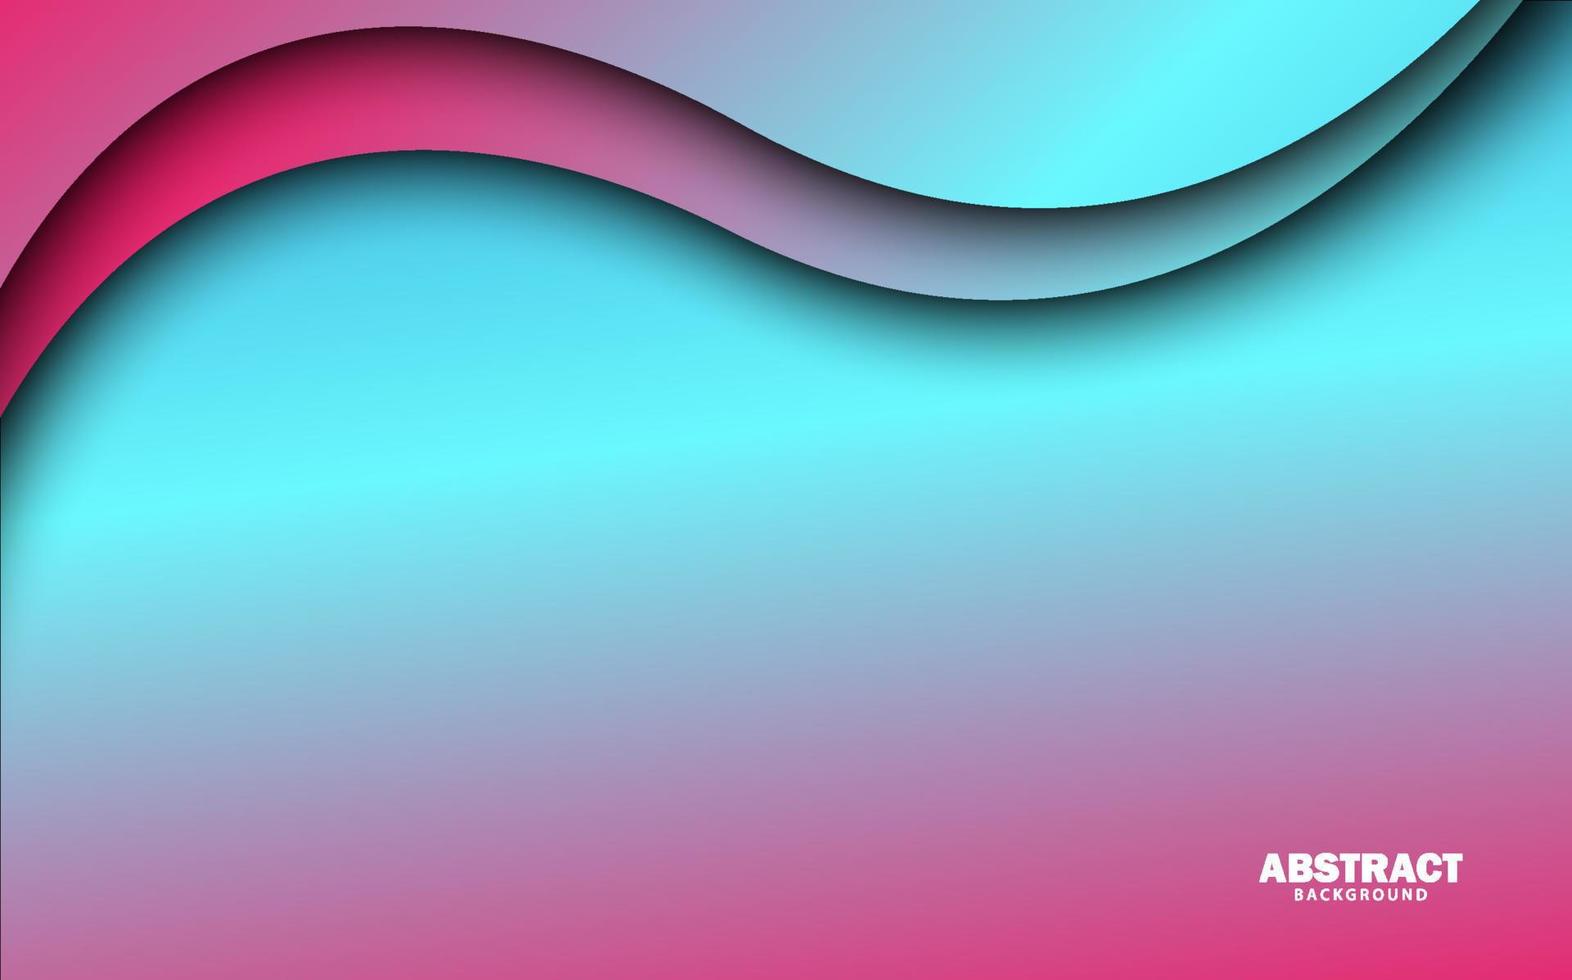 Abstract wave shape blue gradient color background vector